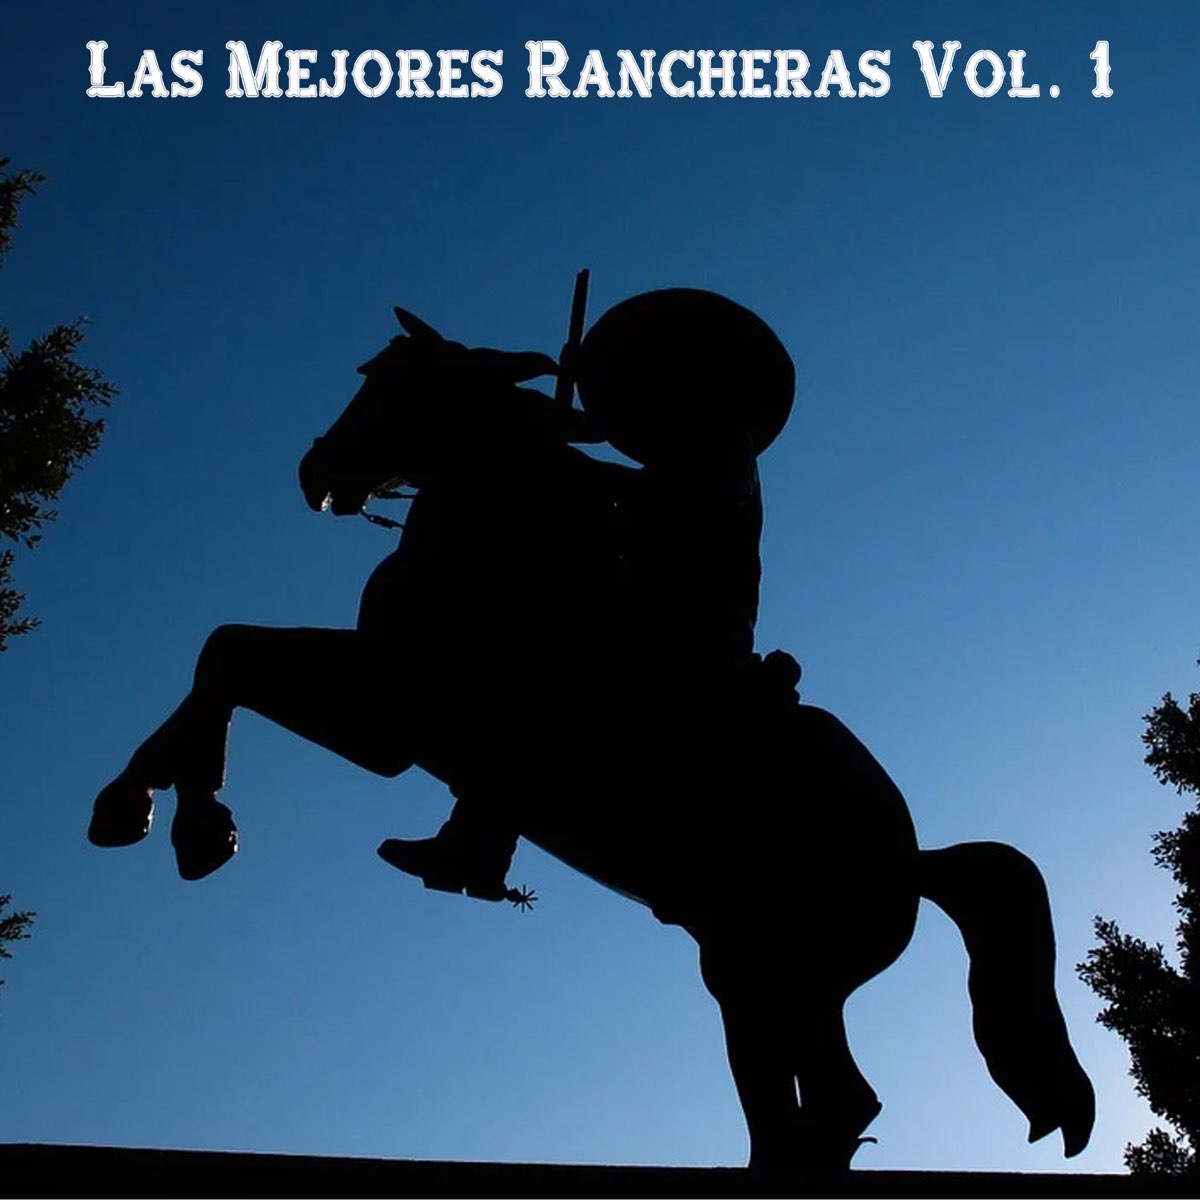 Las Mejores Rancheras, Vol. 1 by Various Artists on Apple Music